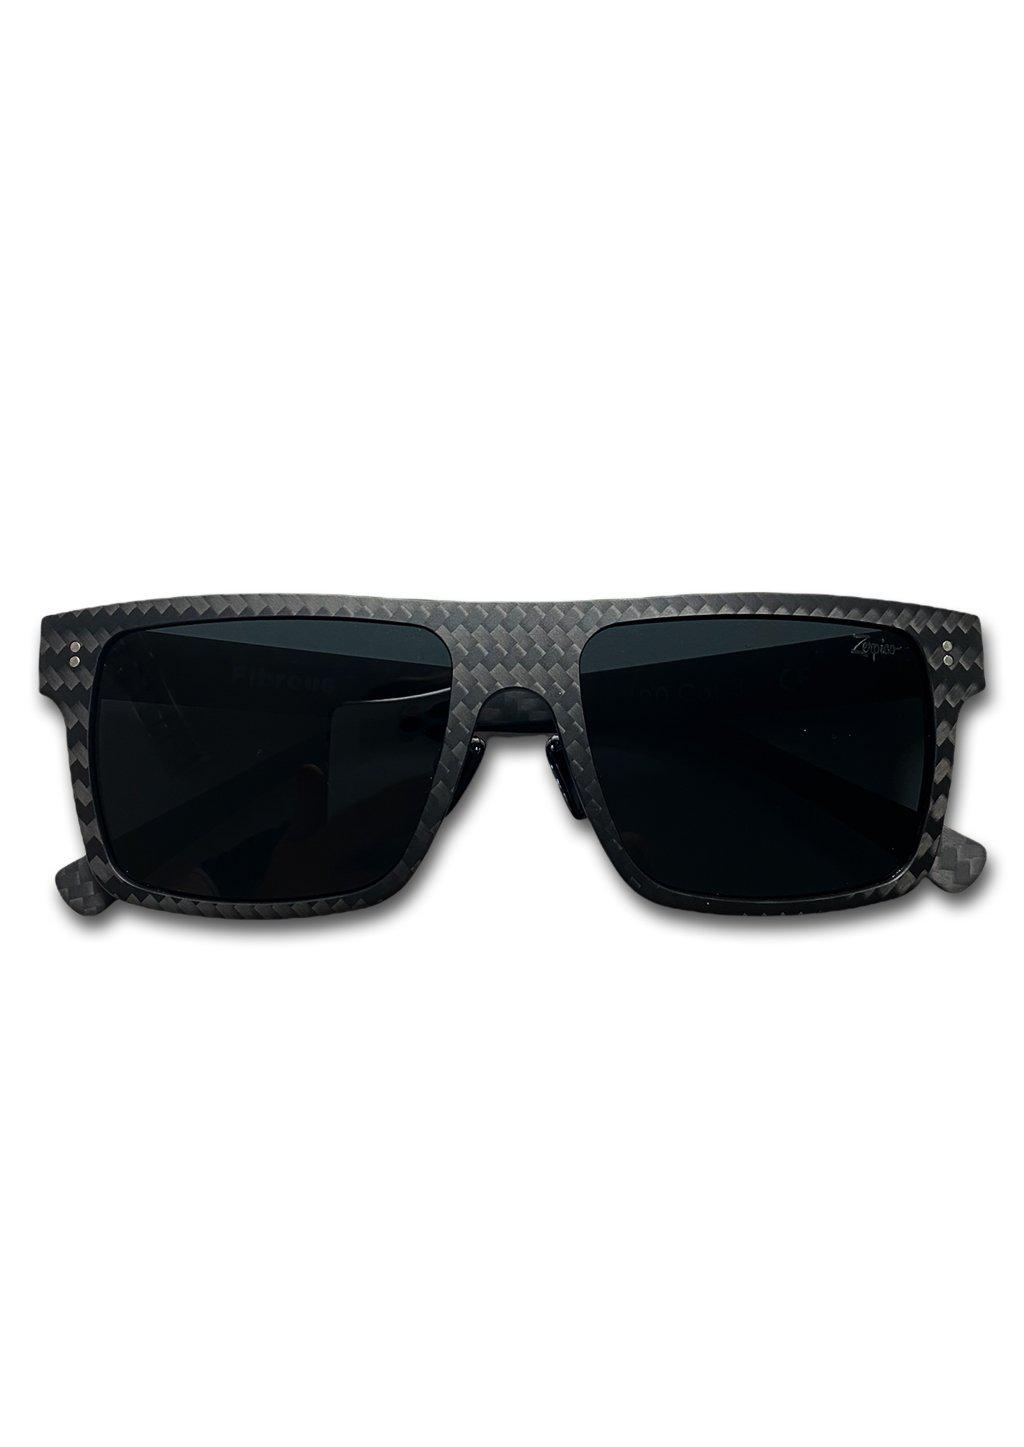 Carbon Fiber Square Sunglasses, Studio shoot with details on the front.